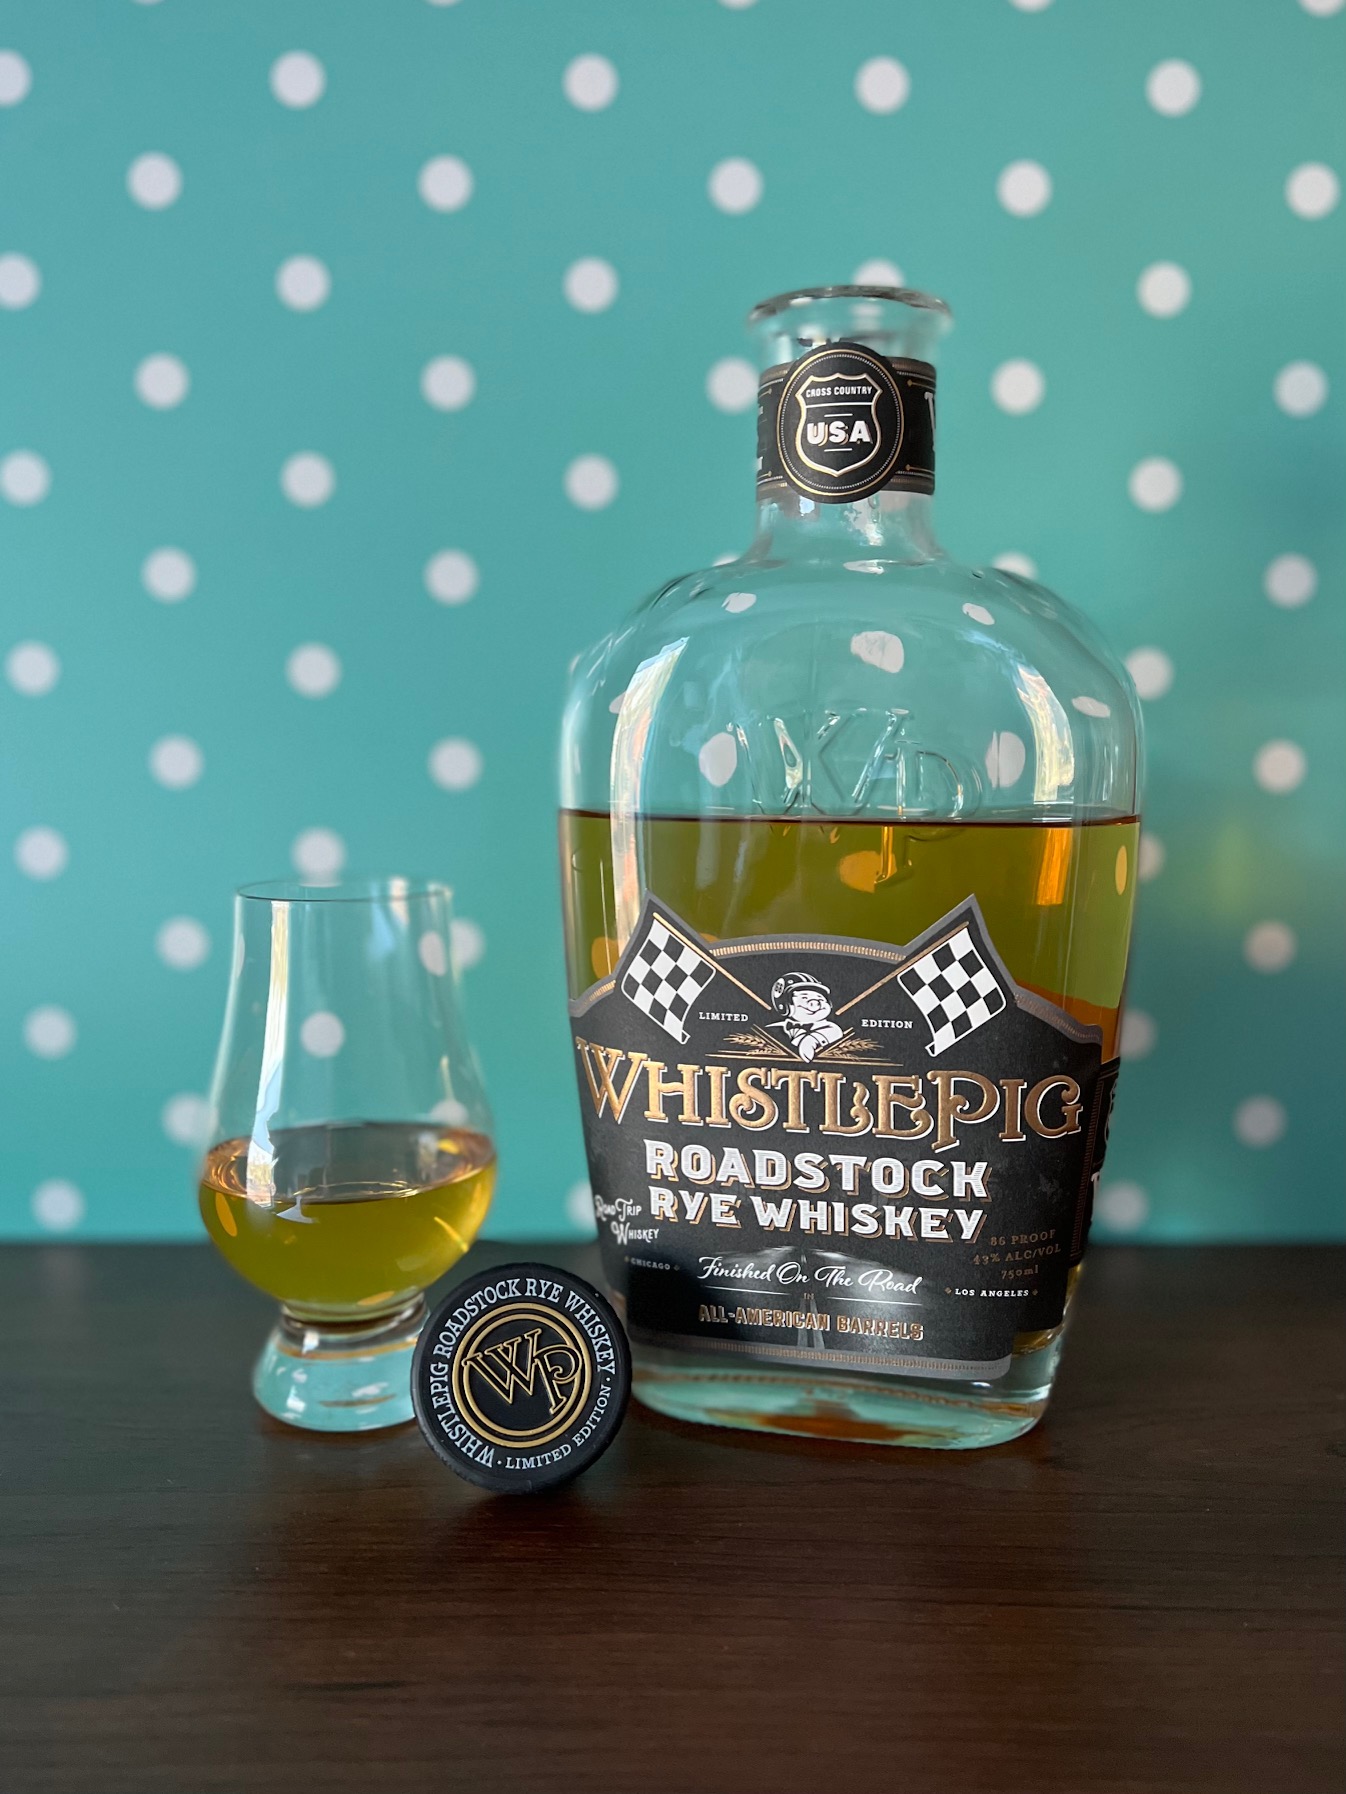 WhistlePig Roadstock Rye Whiskey spent time aging while in a semi-trailer traveling down Route 66.